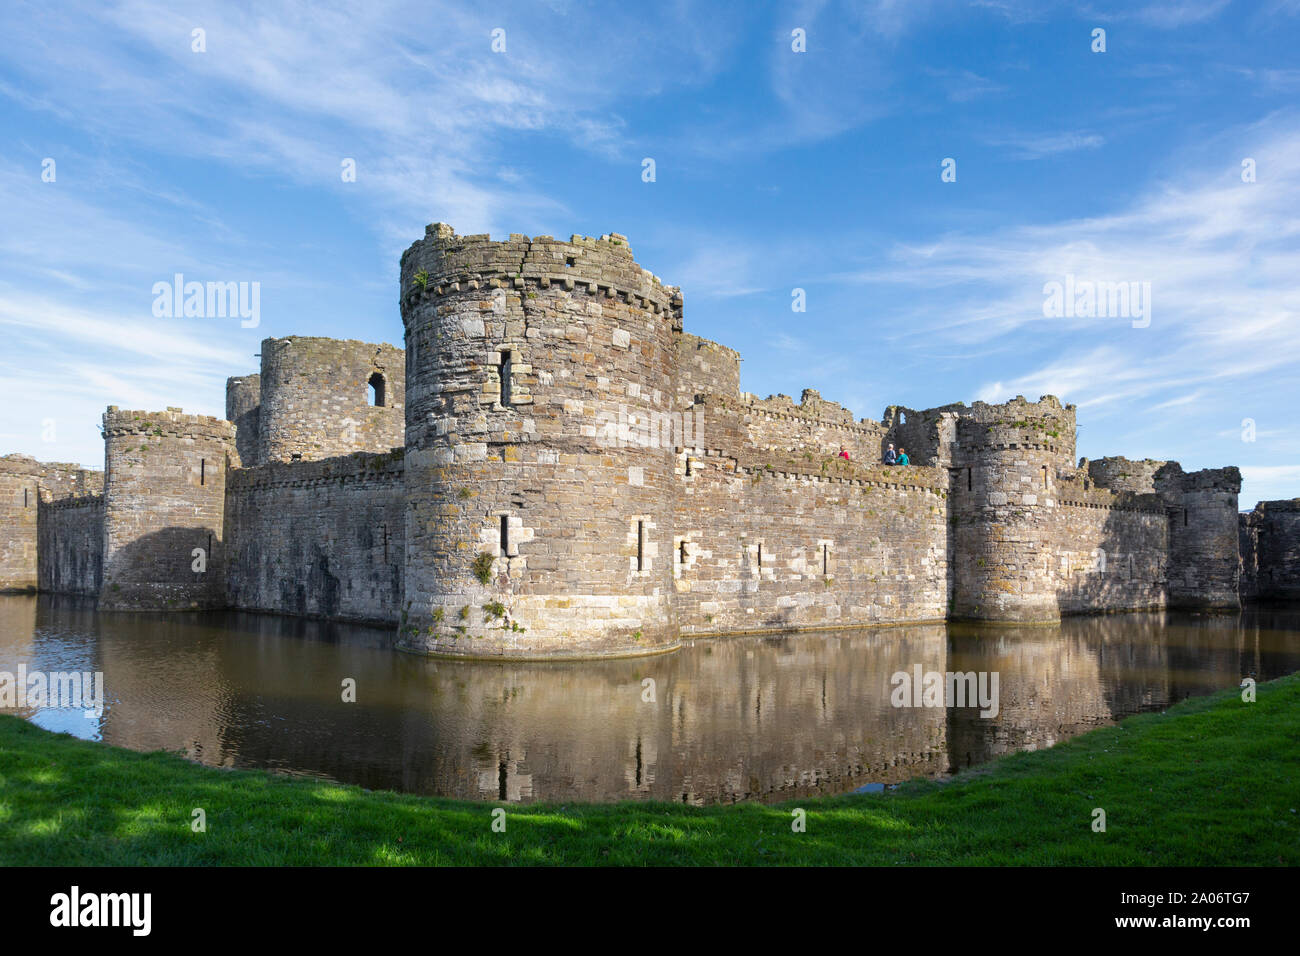 Beaumaris, Anglesey, Wales, United Kingdom.  The 14th century castle.  It is part of the UNESCO World Heritage Site which includes a group of Castles Stock Photo